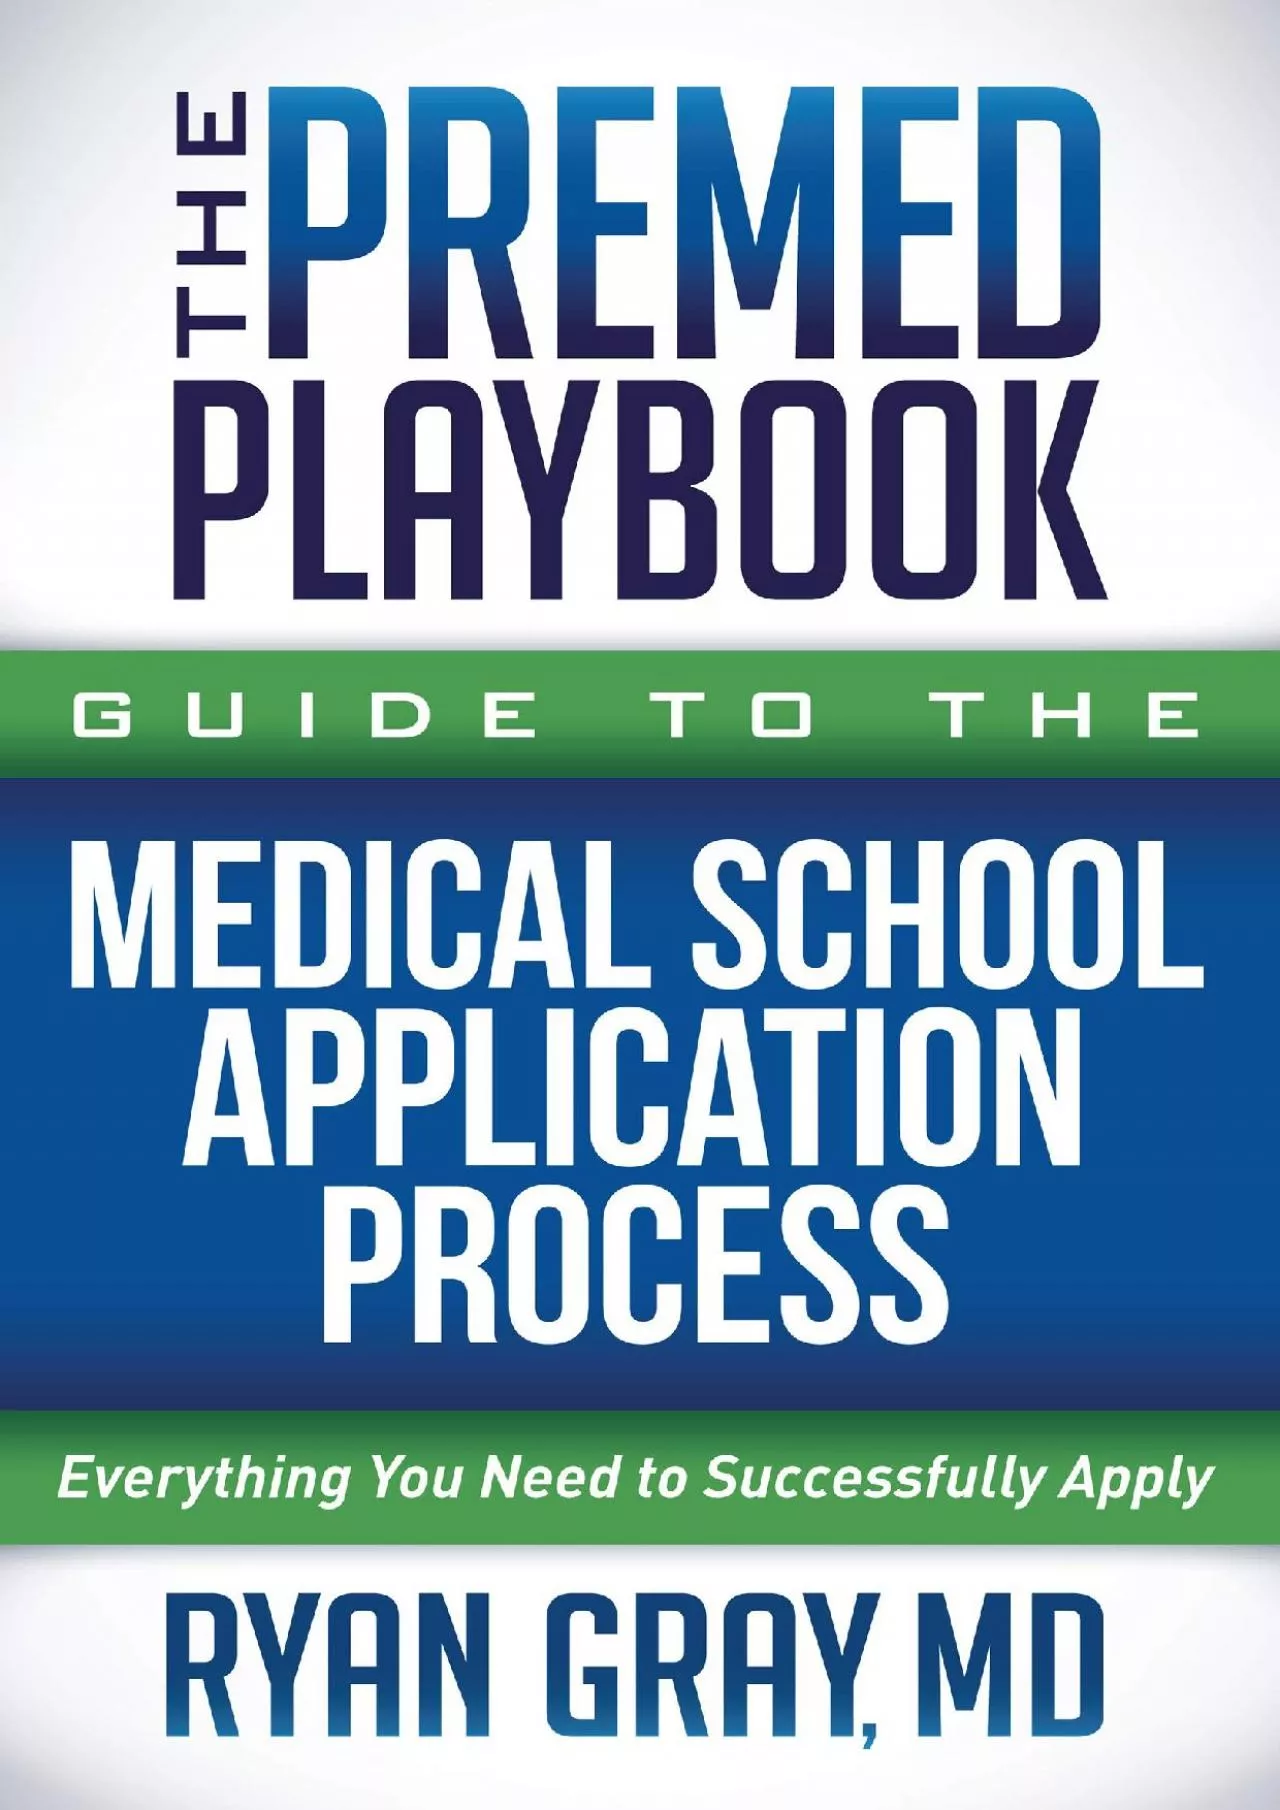 [DOWNLOAD] The Premed Playbook Guide to the Medical School Application Process: Everything